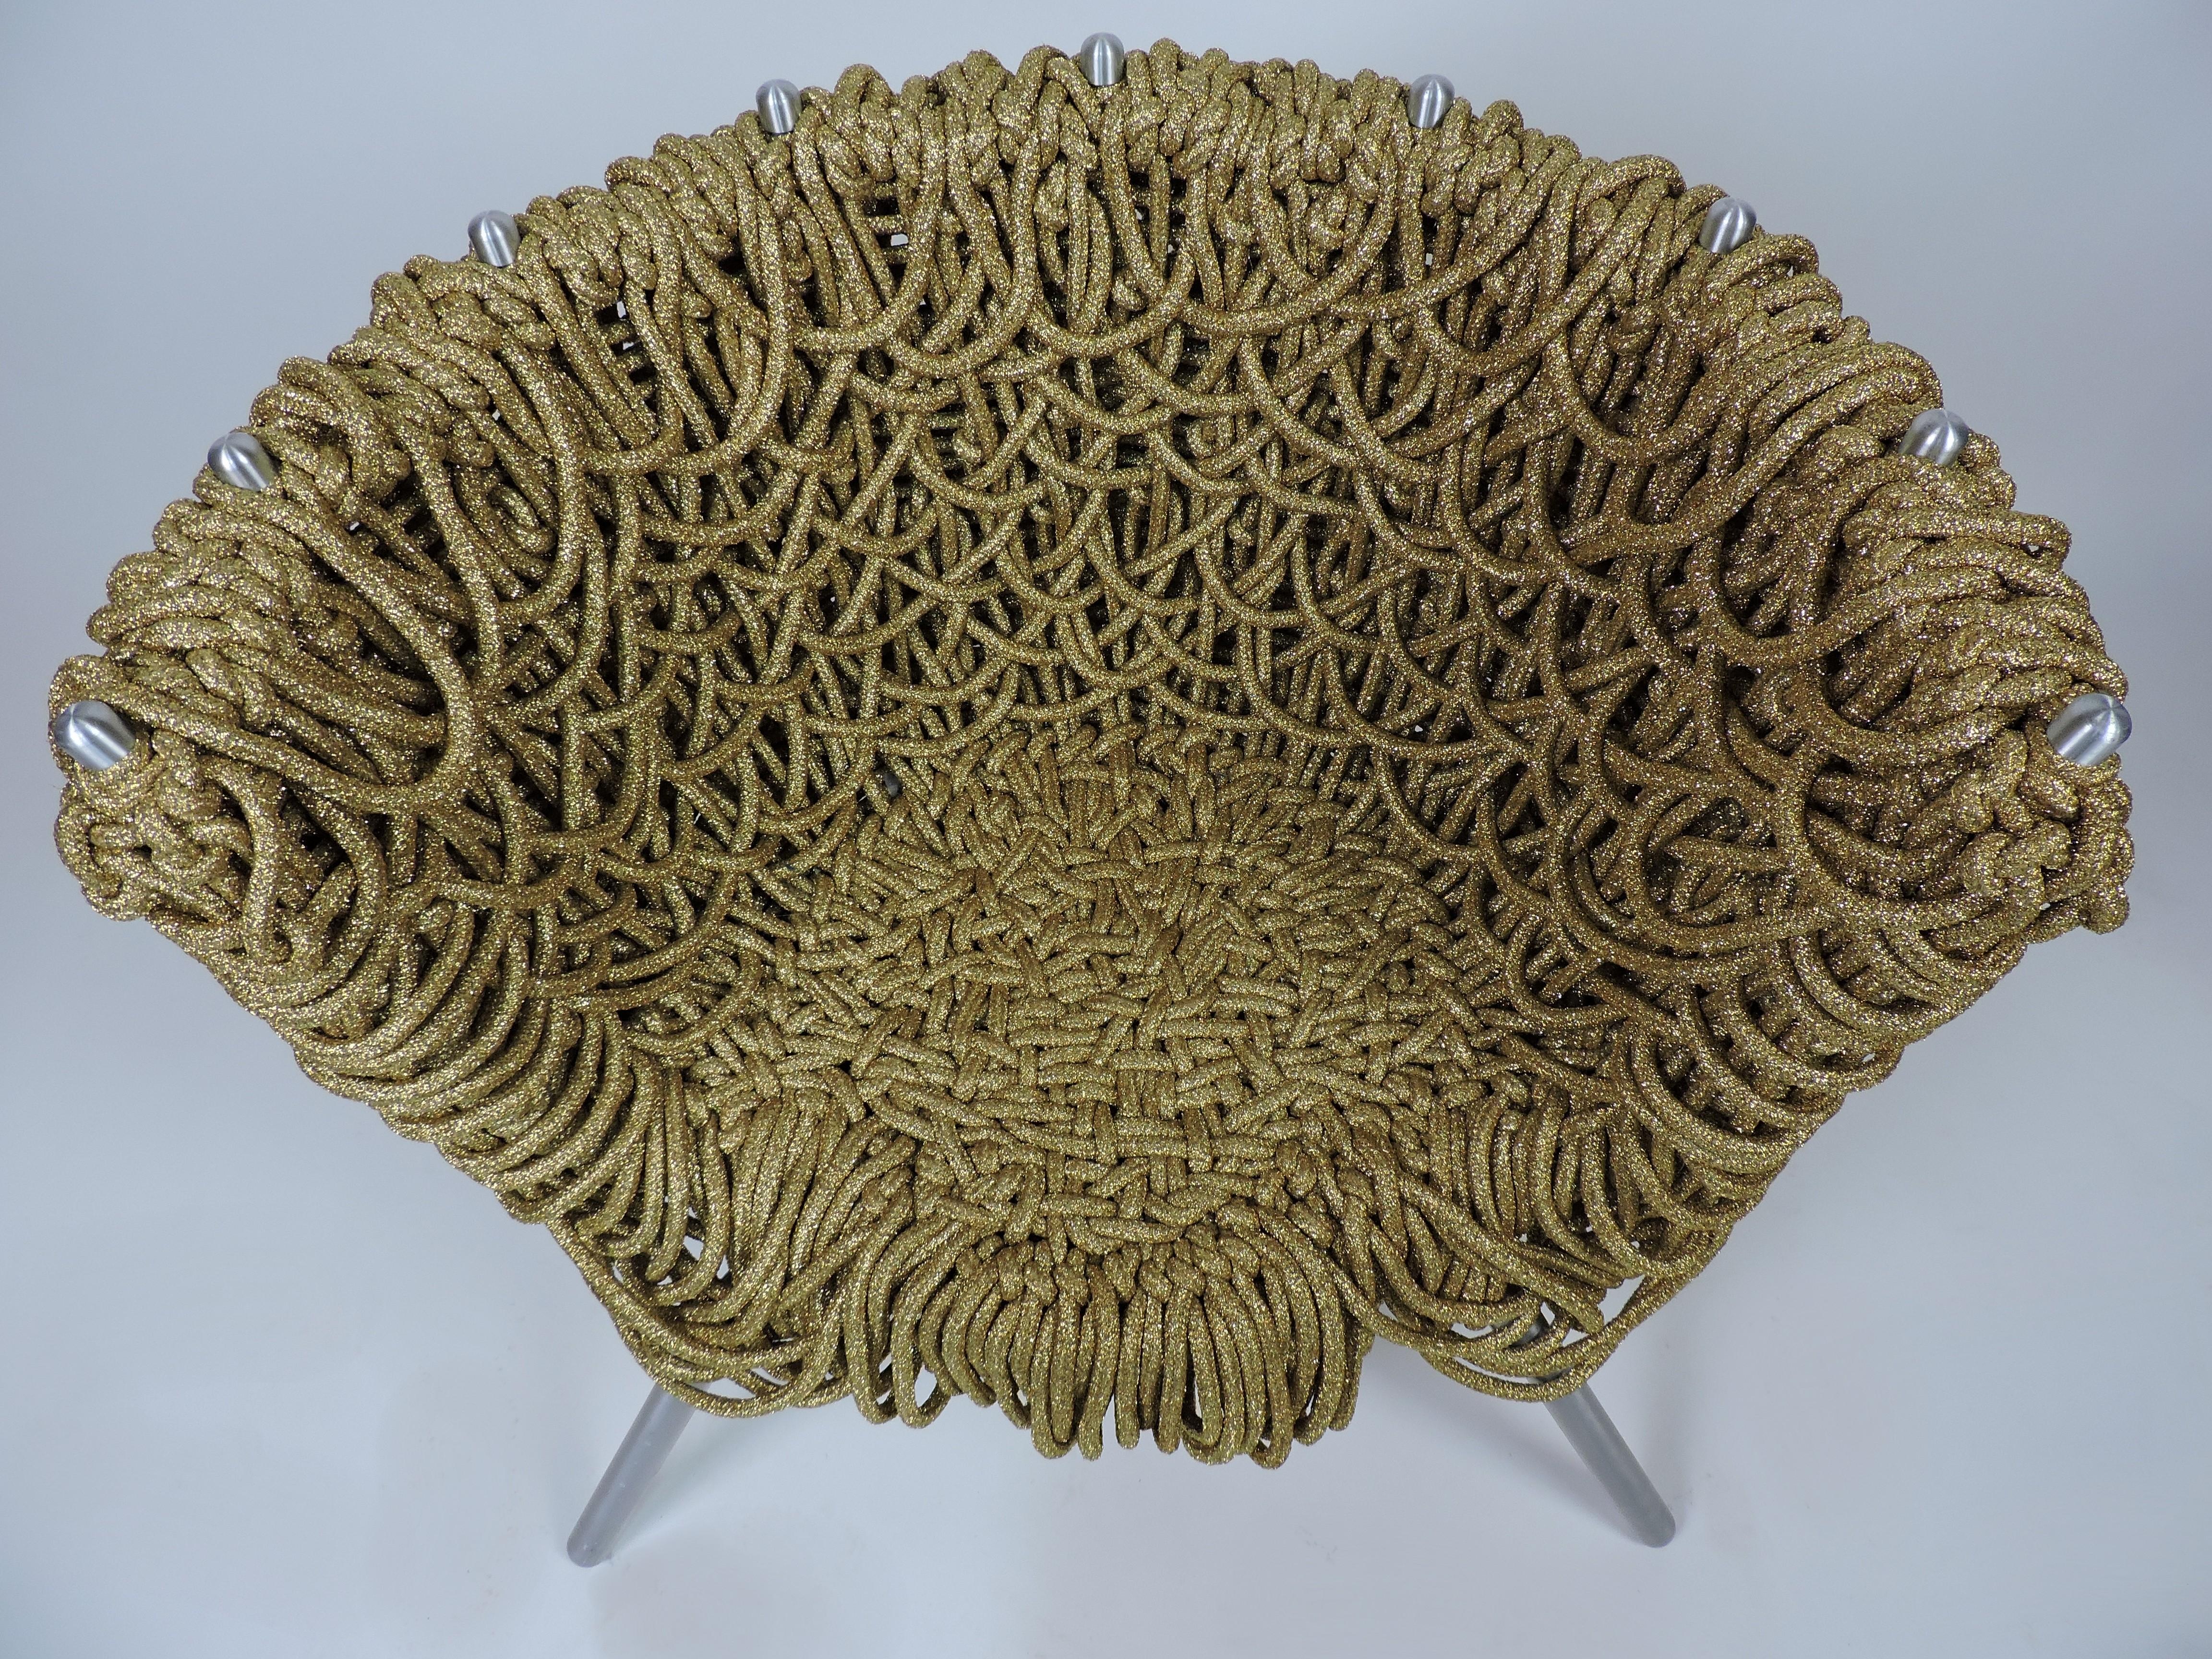 Woven Fernando and Humberto Campana Brothers Vermelha Arm Chair by Edra in Gold For Sale